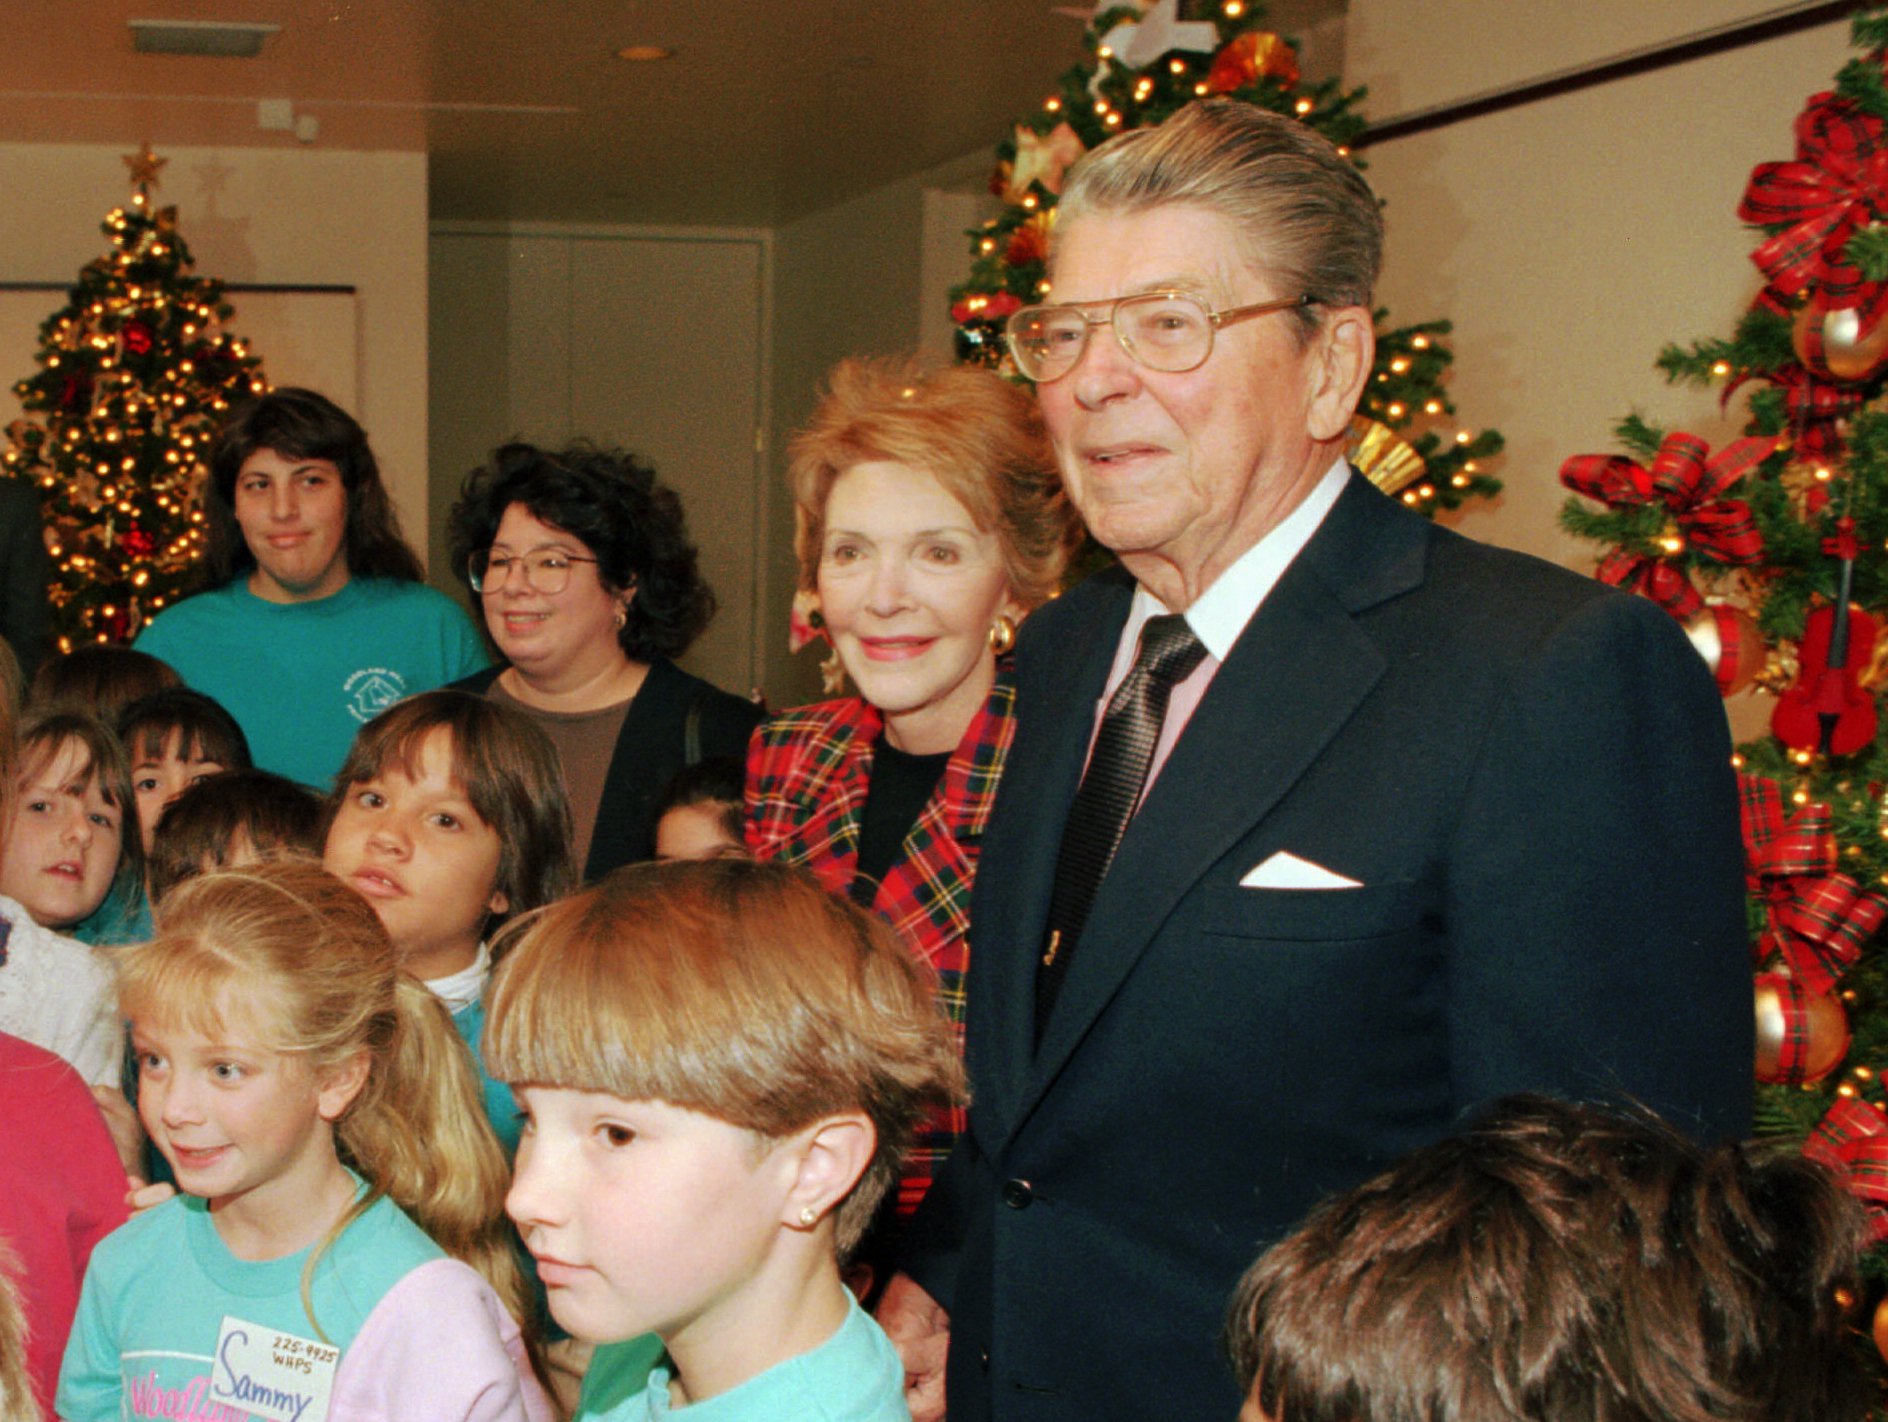 Former President Ronald Reagan and his wife Nancy pose for pictures during a tour of the "Christmas Around the World" exhibit at the Ronald Reagan Presidential Library and Museum Tuesday, Nov. 22, 1994, in Simi Valley, Calif.  The event marked the former President's first public appearance since the Nov. 5, 1994, public announcement that he has been diagnosed with Alzheimer's disease.  The disease seems to have silenced Reagan, who cherished the moments he spent spinning yarns about Hollywood andthe White House.  (AP Photo/Mark J. Terrill)